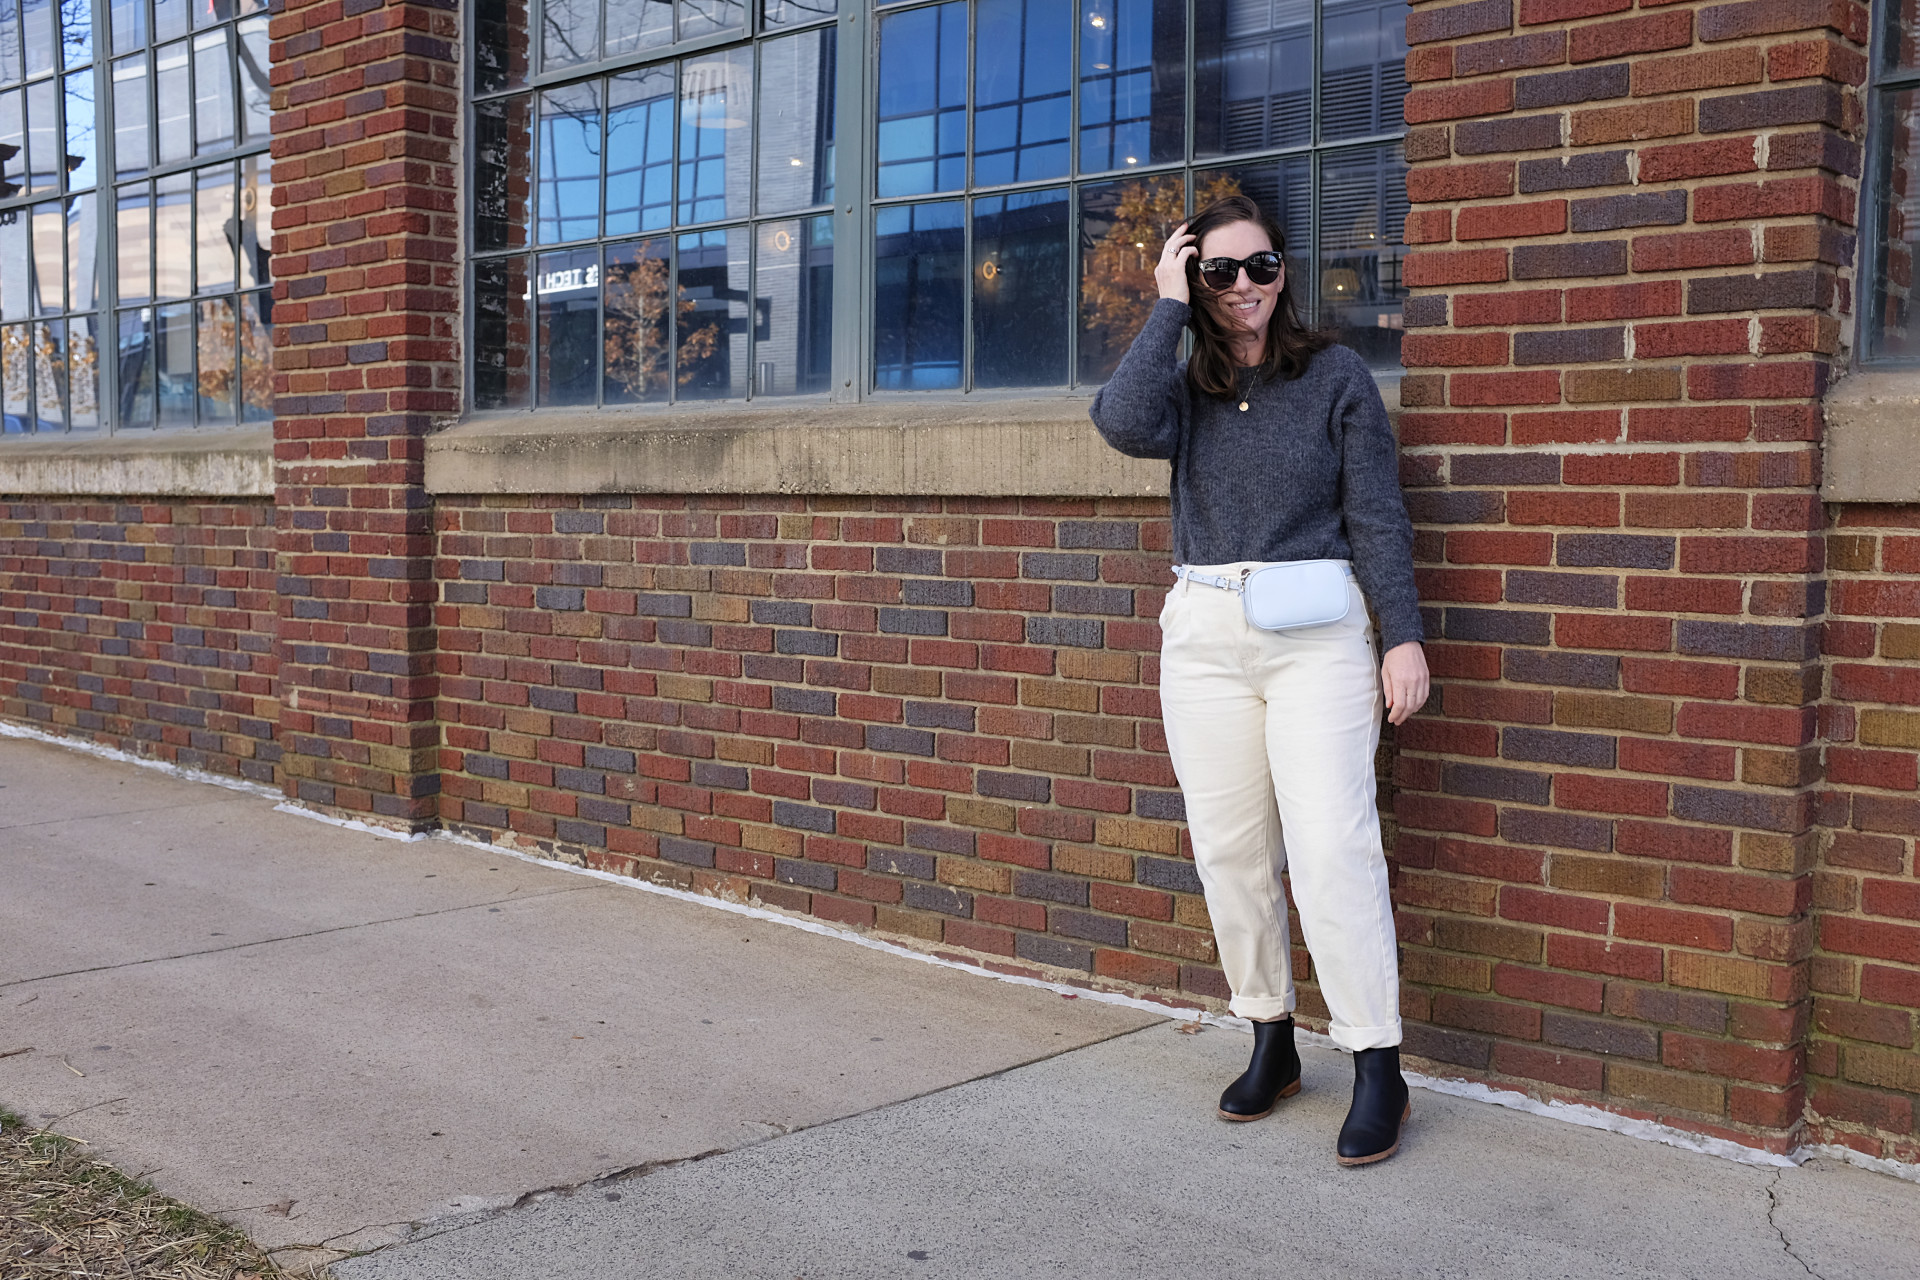 Alyssa is standing in front of a brick building. She is wearing a grey sweater with off-white pants, black sunglasses, a light blue belt bag, and black boots. She has her right hand in her hair and it is windy.